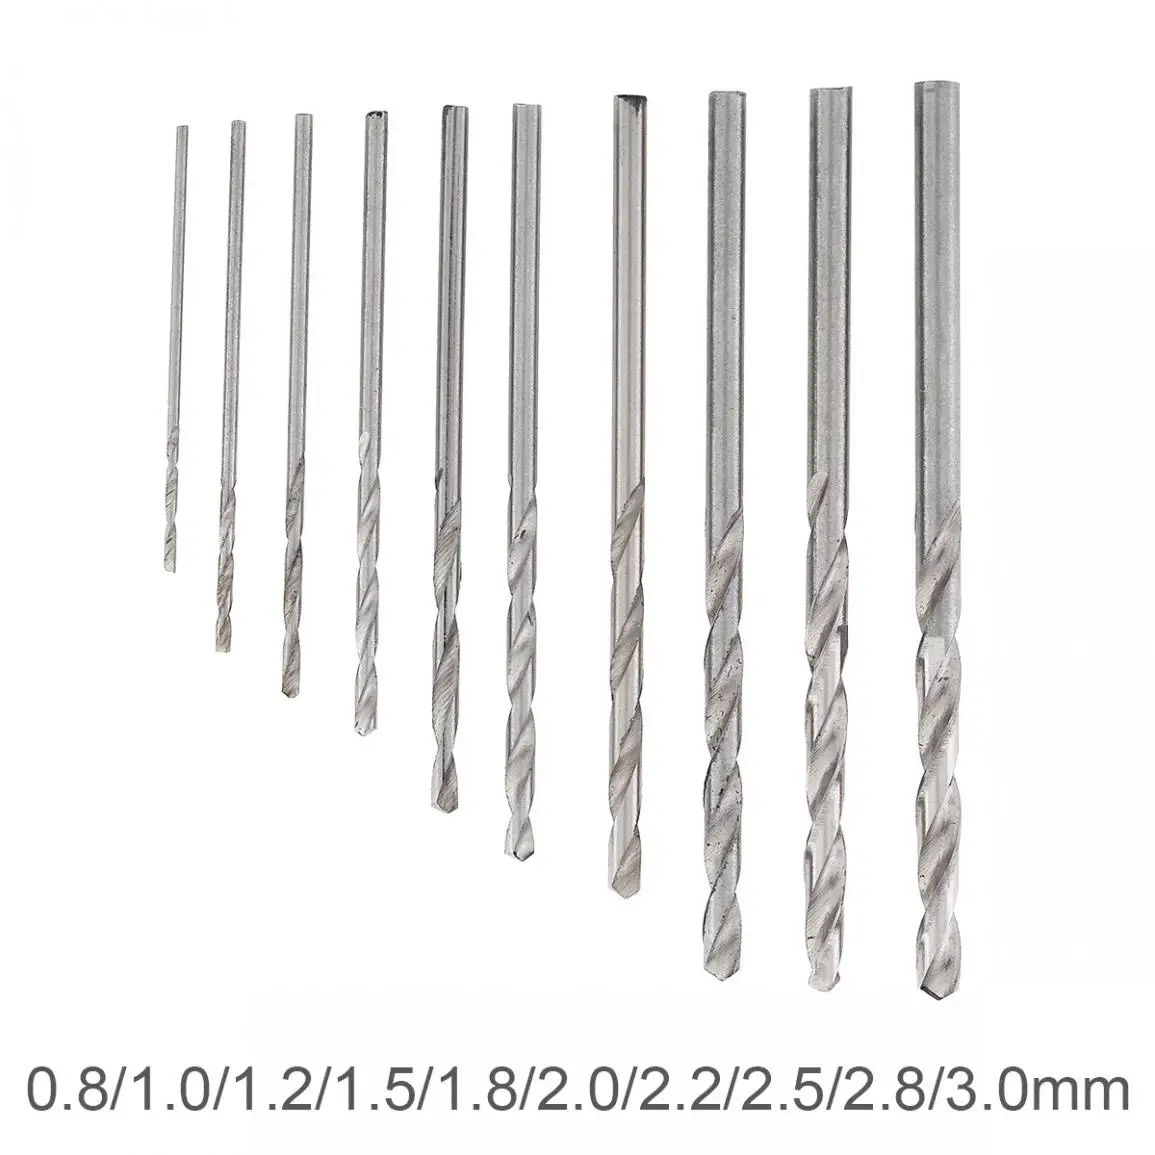 10pcs/lot High Speed Metric HSS Twist Drill Bits Coated Set 0.8MM-3.0MM Stainless Steel Small Cutting Resistance for Hole Punch 13pcs metric 1 5 6 5mm round handle fried dough twists drill set titanium coated high speed steel woodworking metal drill bit